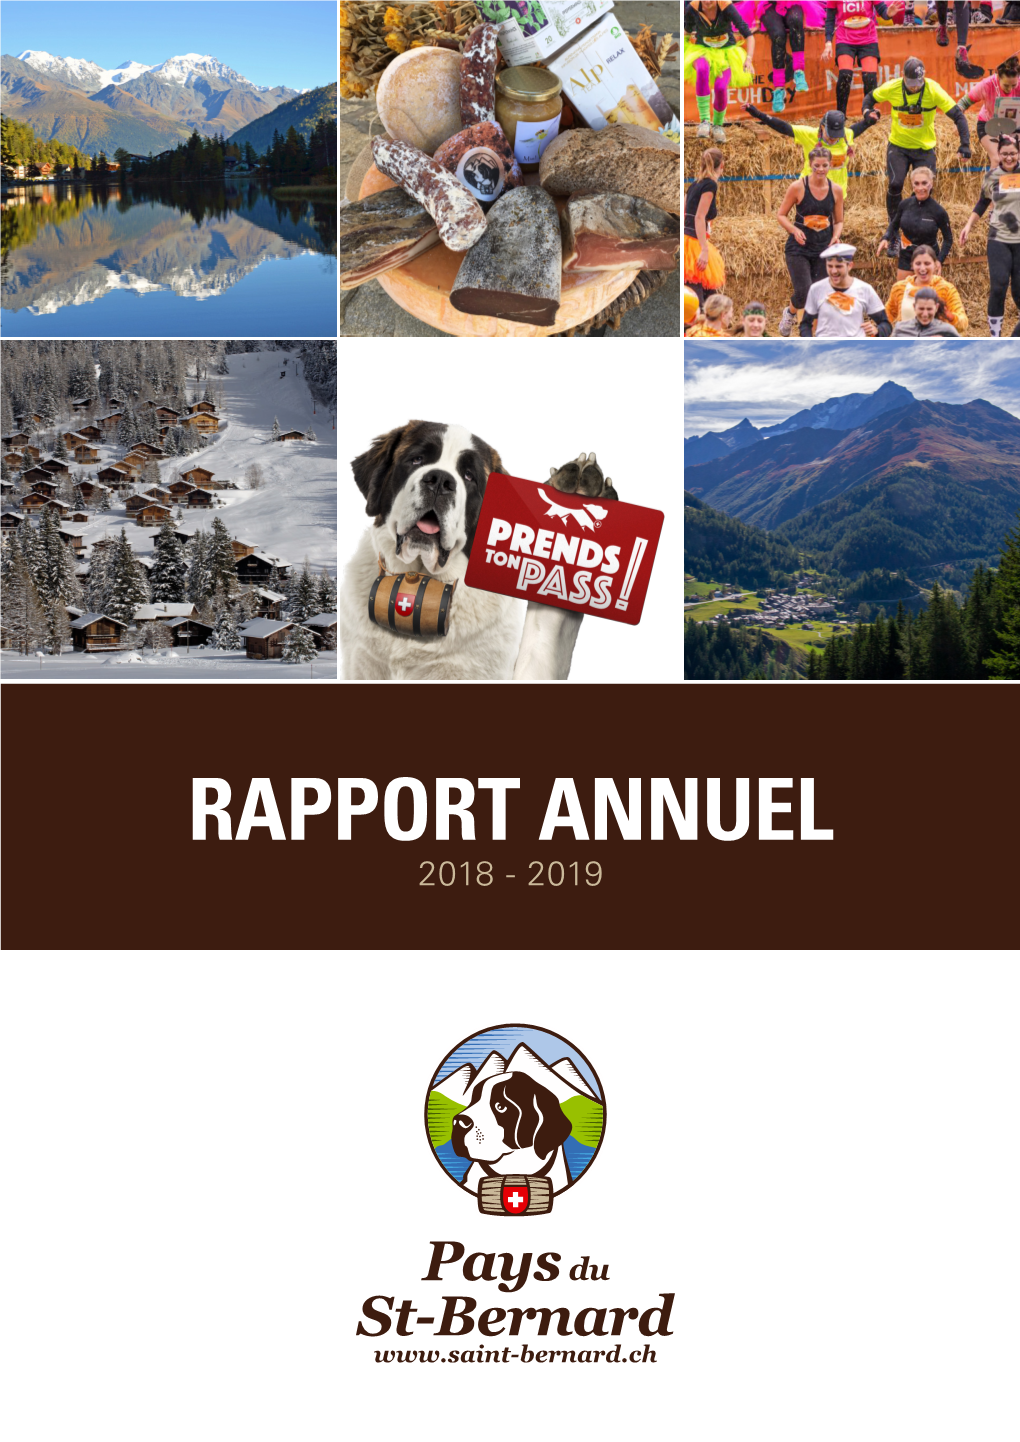 Rapport Annuel 2018 - 2019